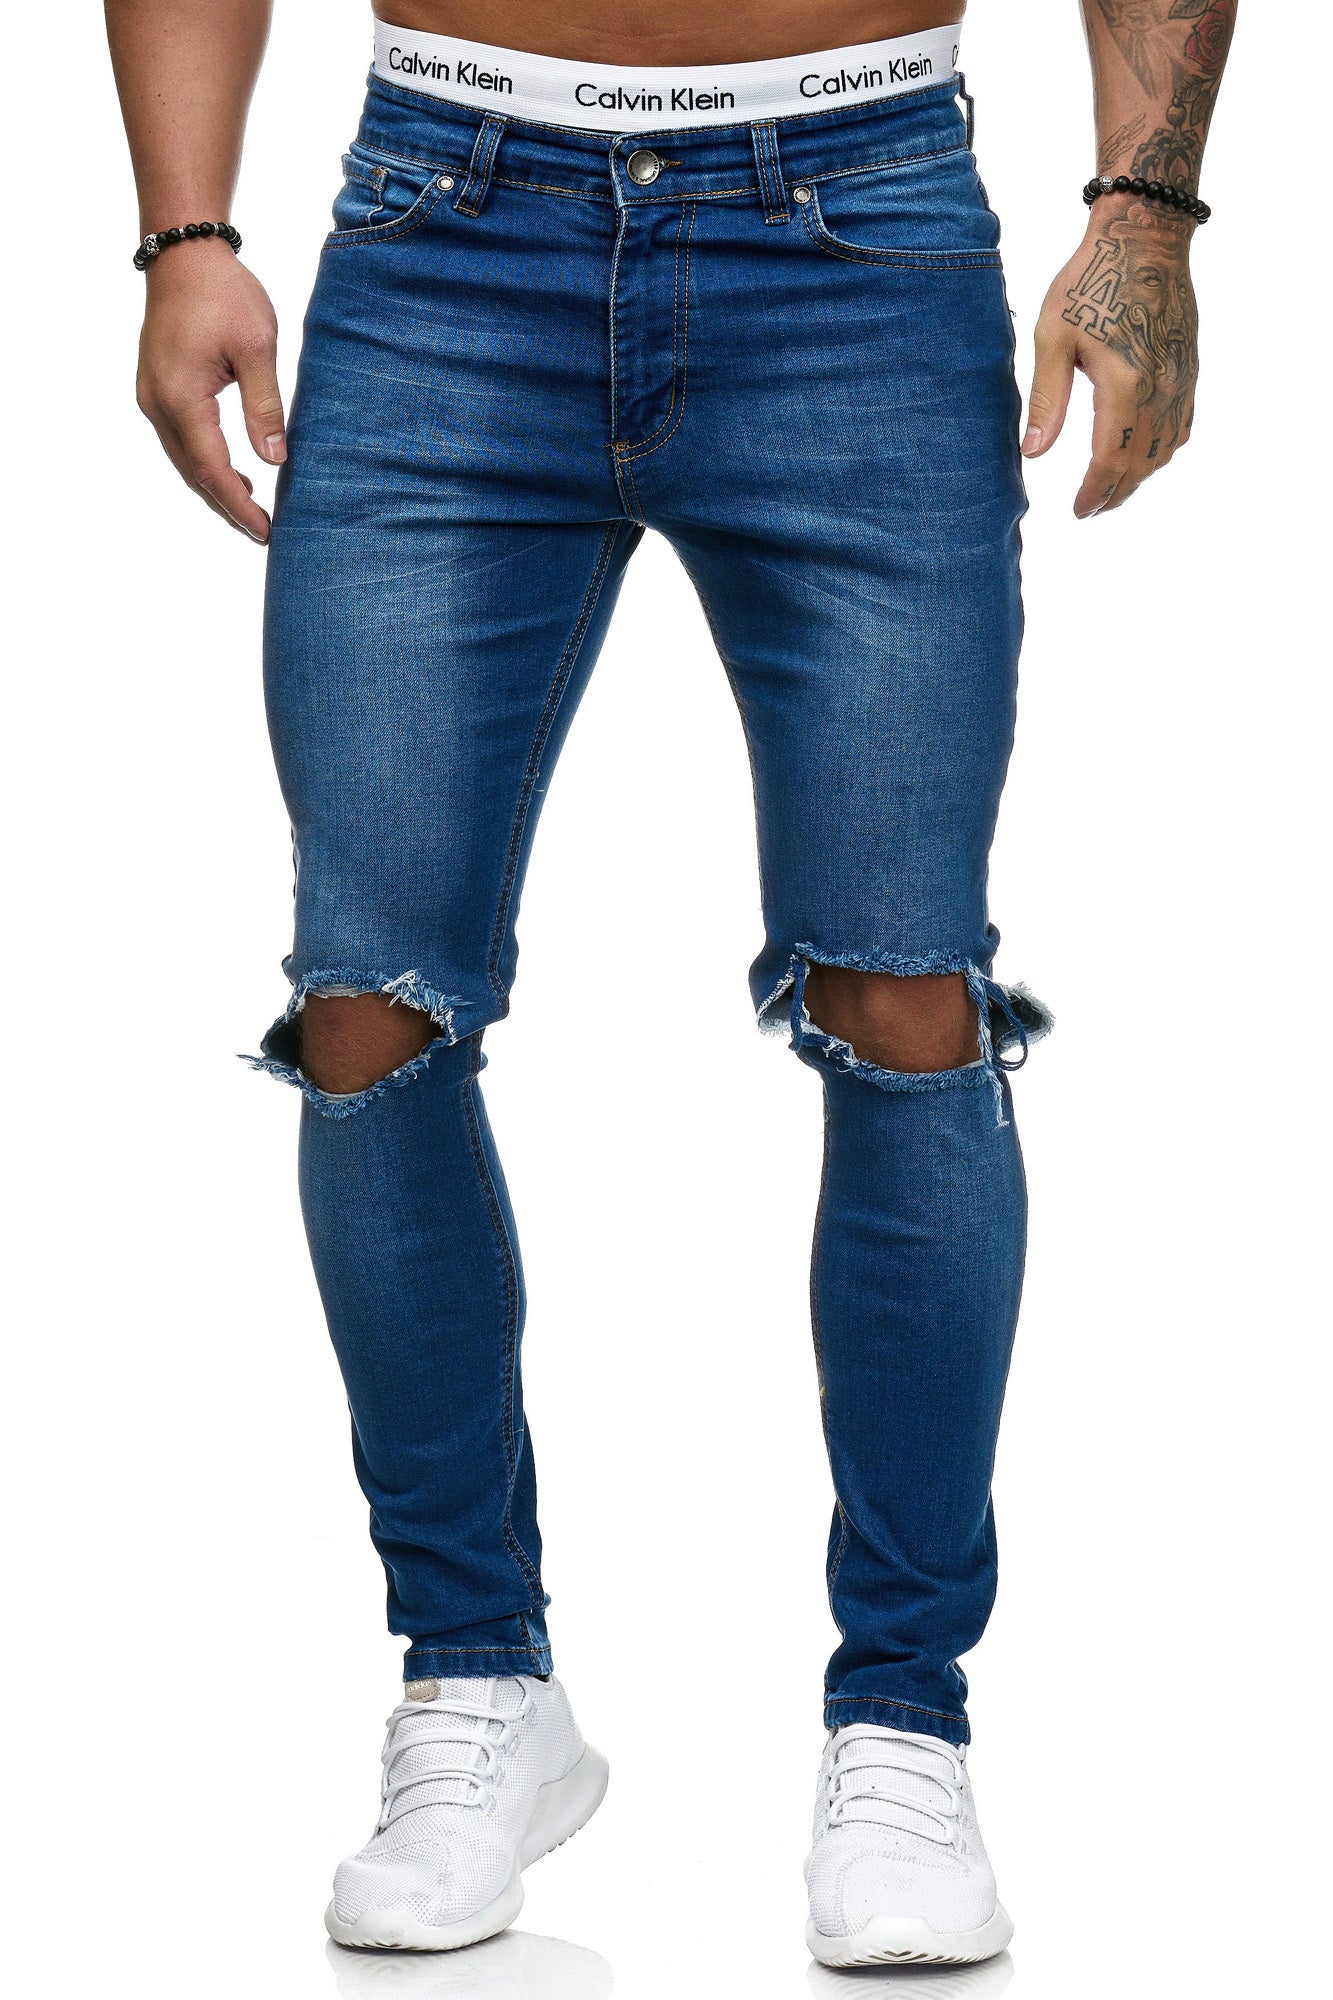 han Net vejkryds Blowout Knees Skinny Ripped Distressed Jeans - Blue X4 - FASH STOP